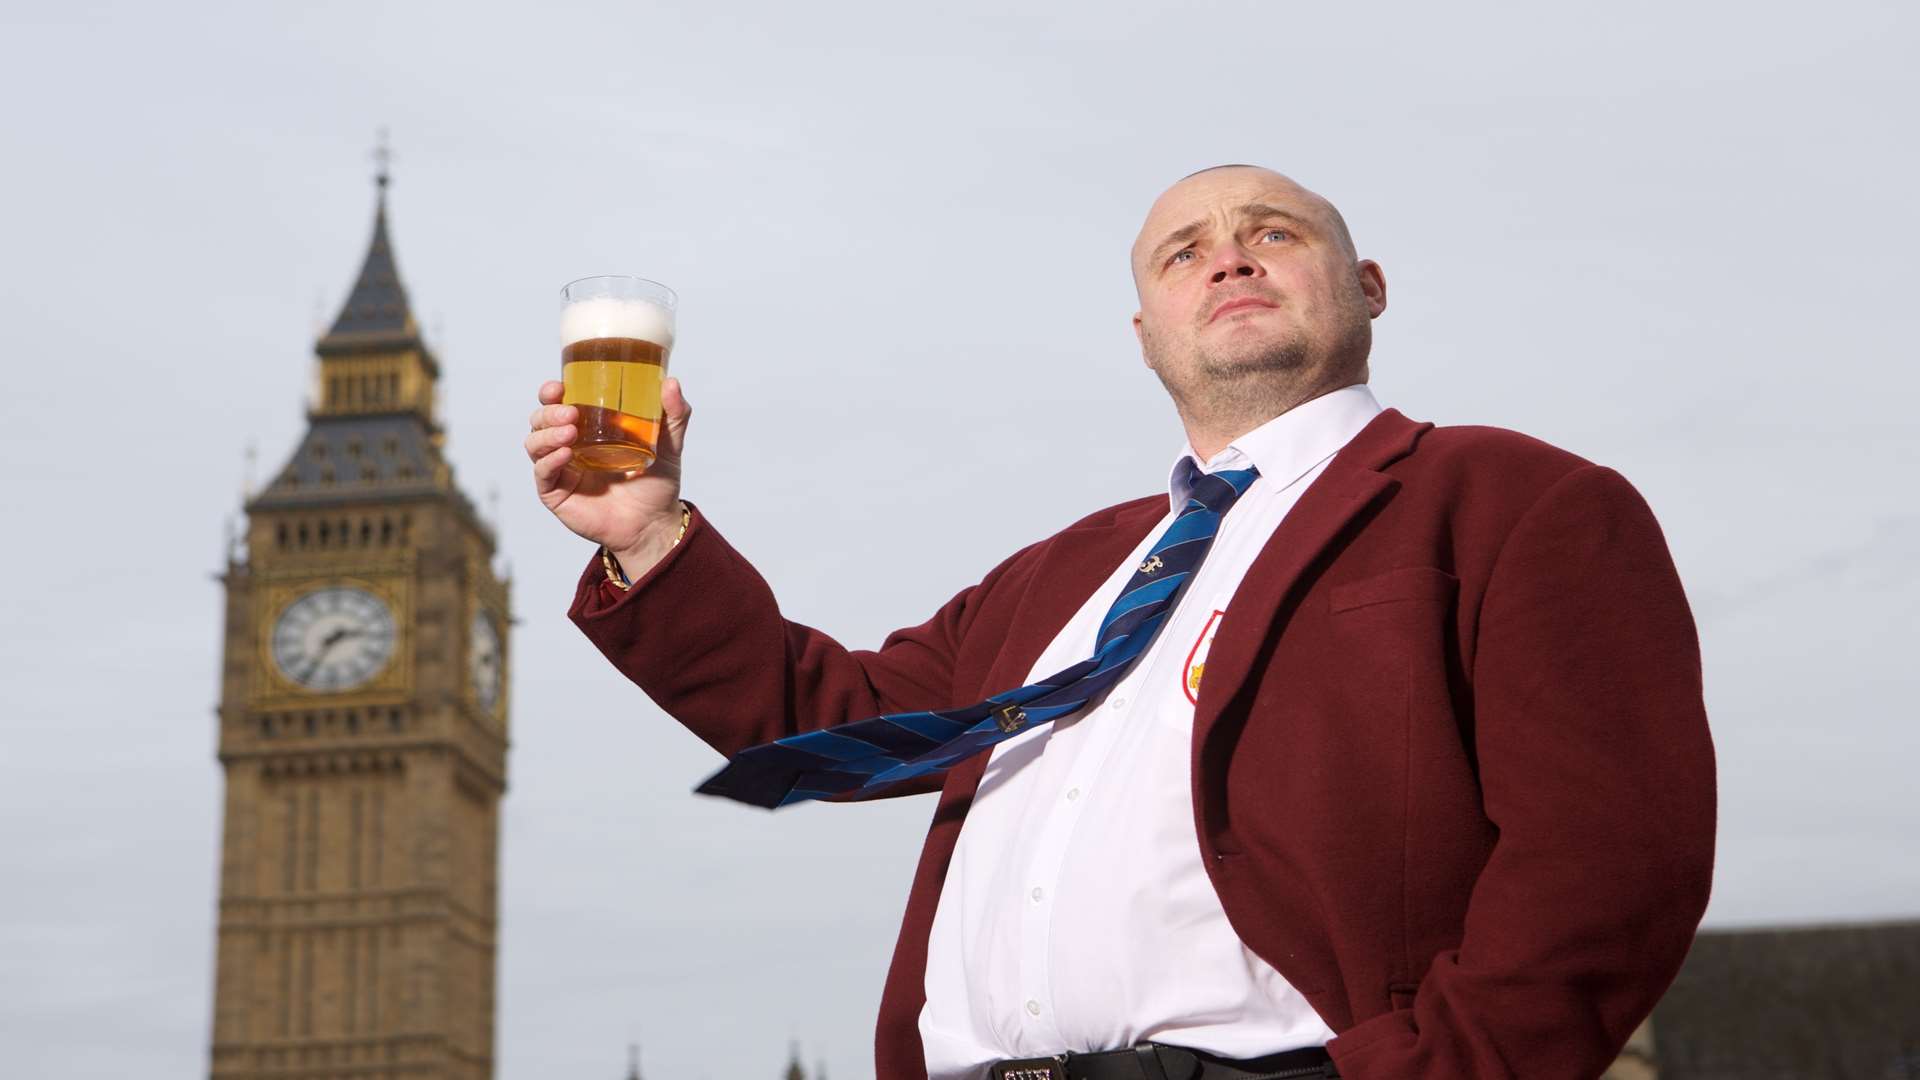 Al Murray will contest the seat in South Thanet